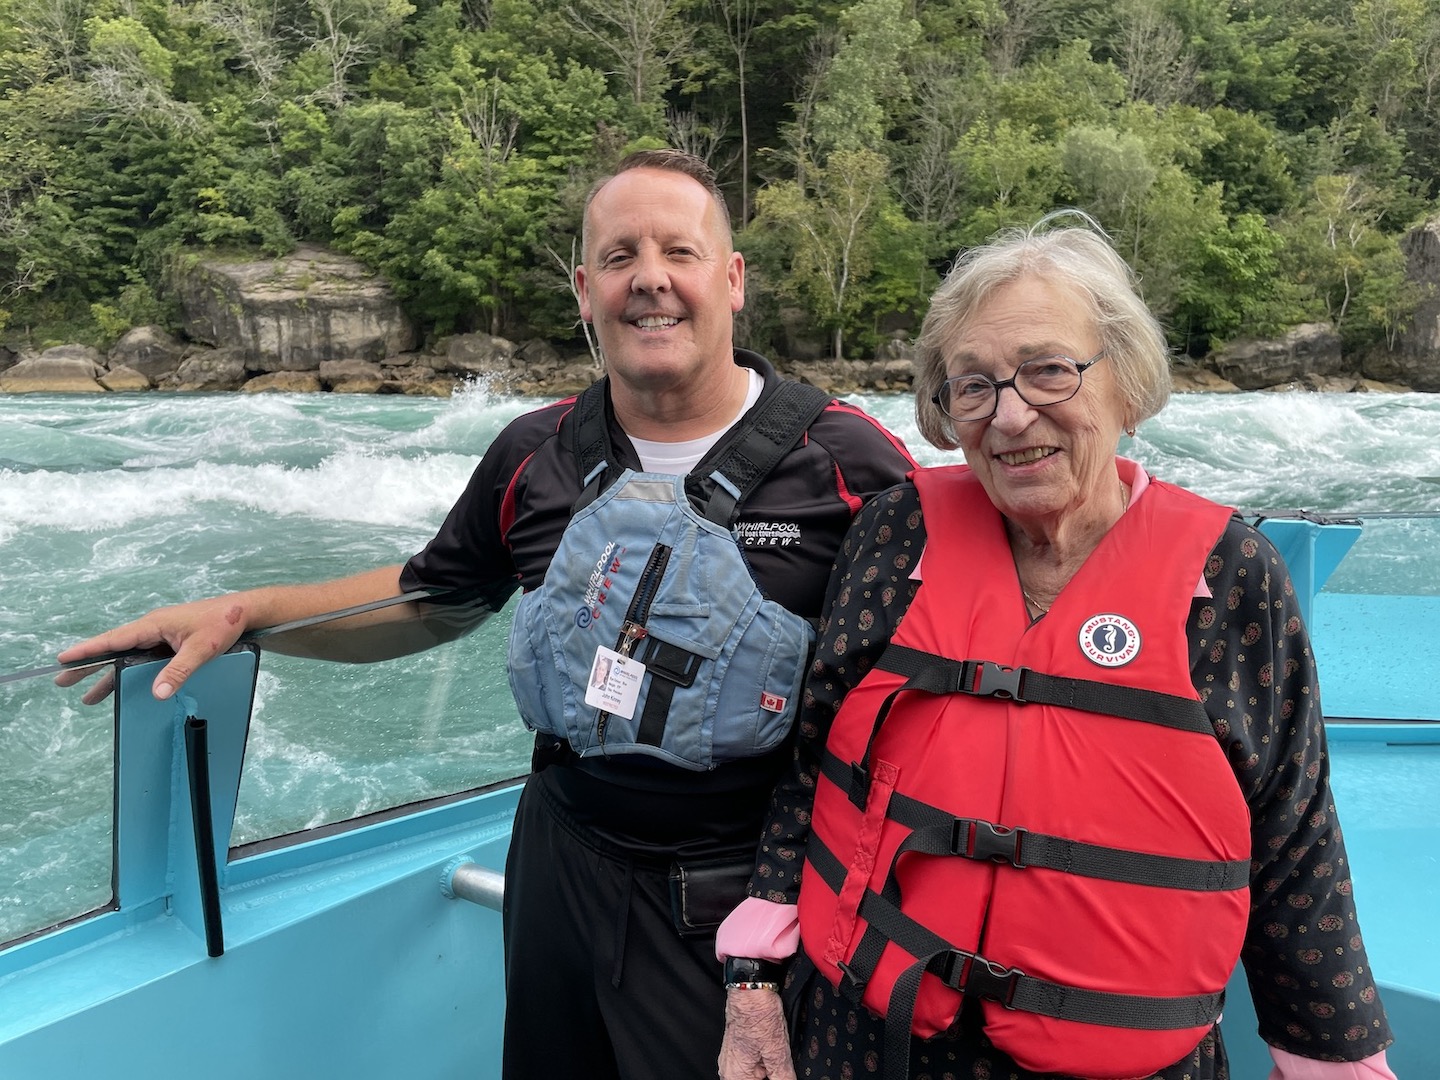 John Kinney and Sandy Dugan take a break on the water to pose for a photo.